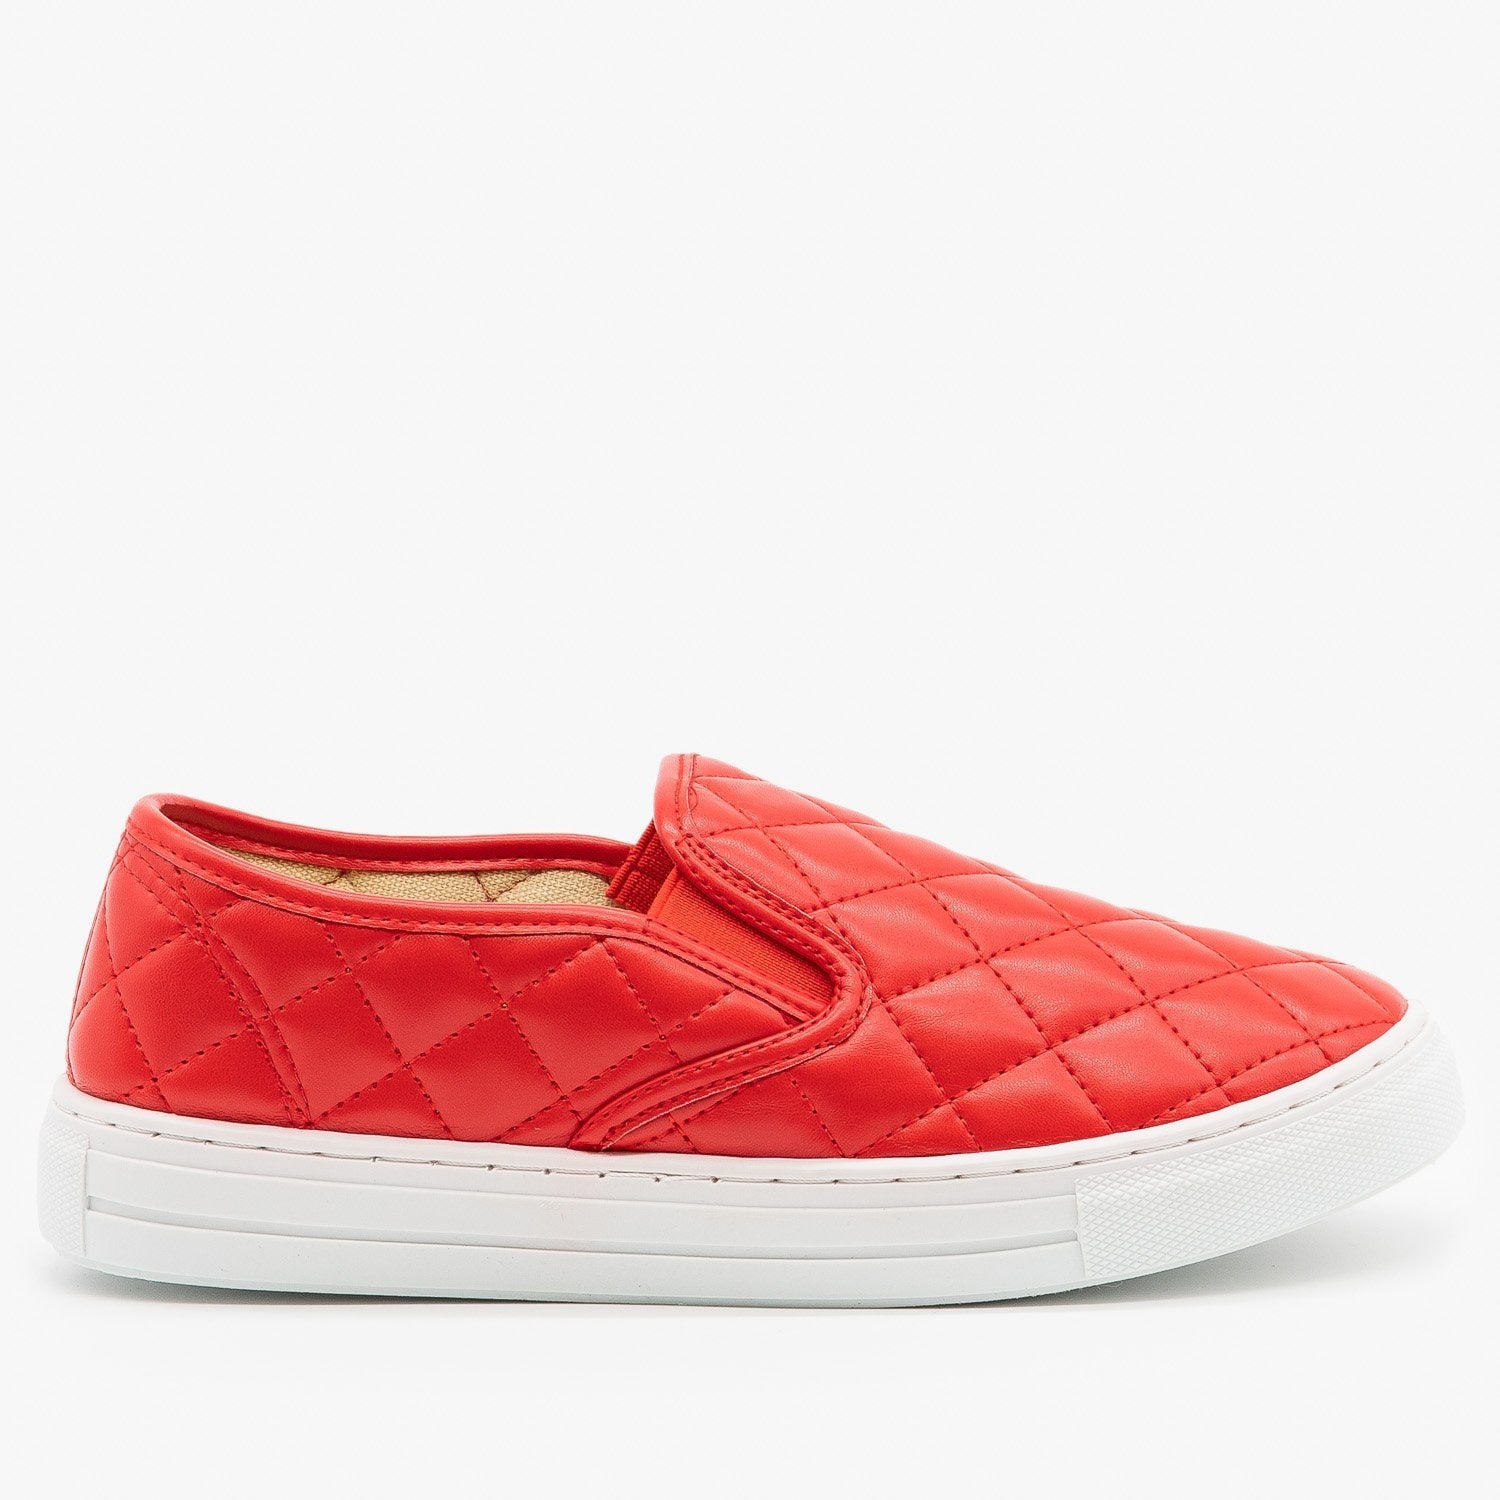 quilted slip on sneakers black